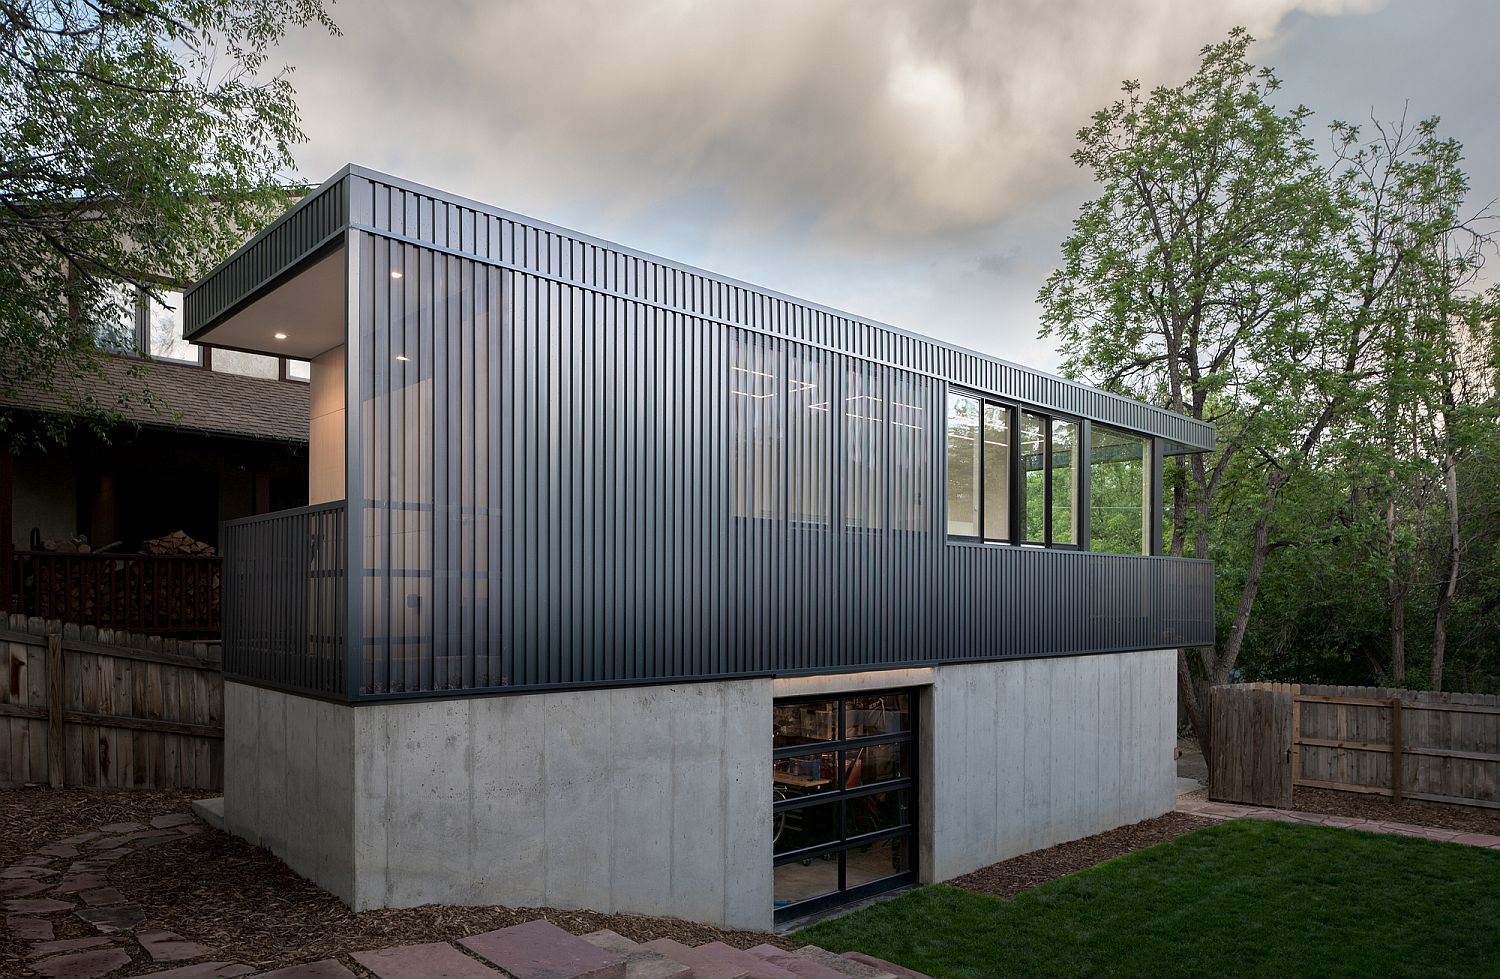 Dark slats give the exterior a modern, stylish appeal